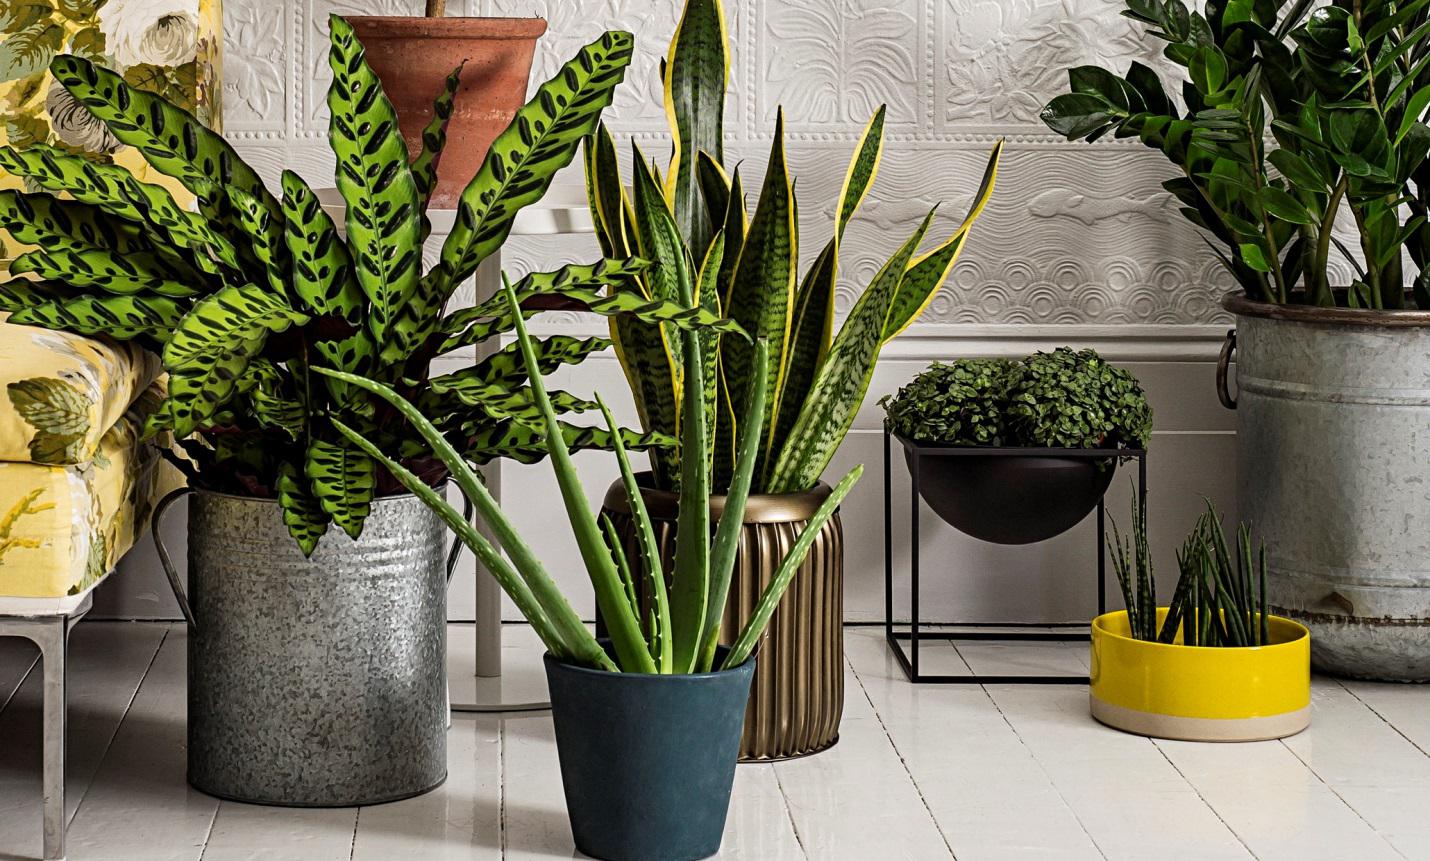 Decorating our homes with plants - Interior Design Explained